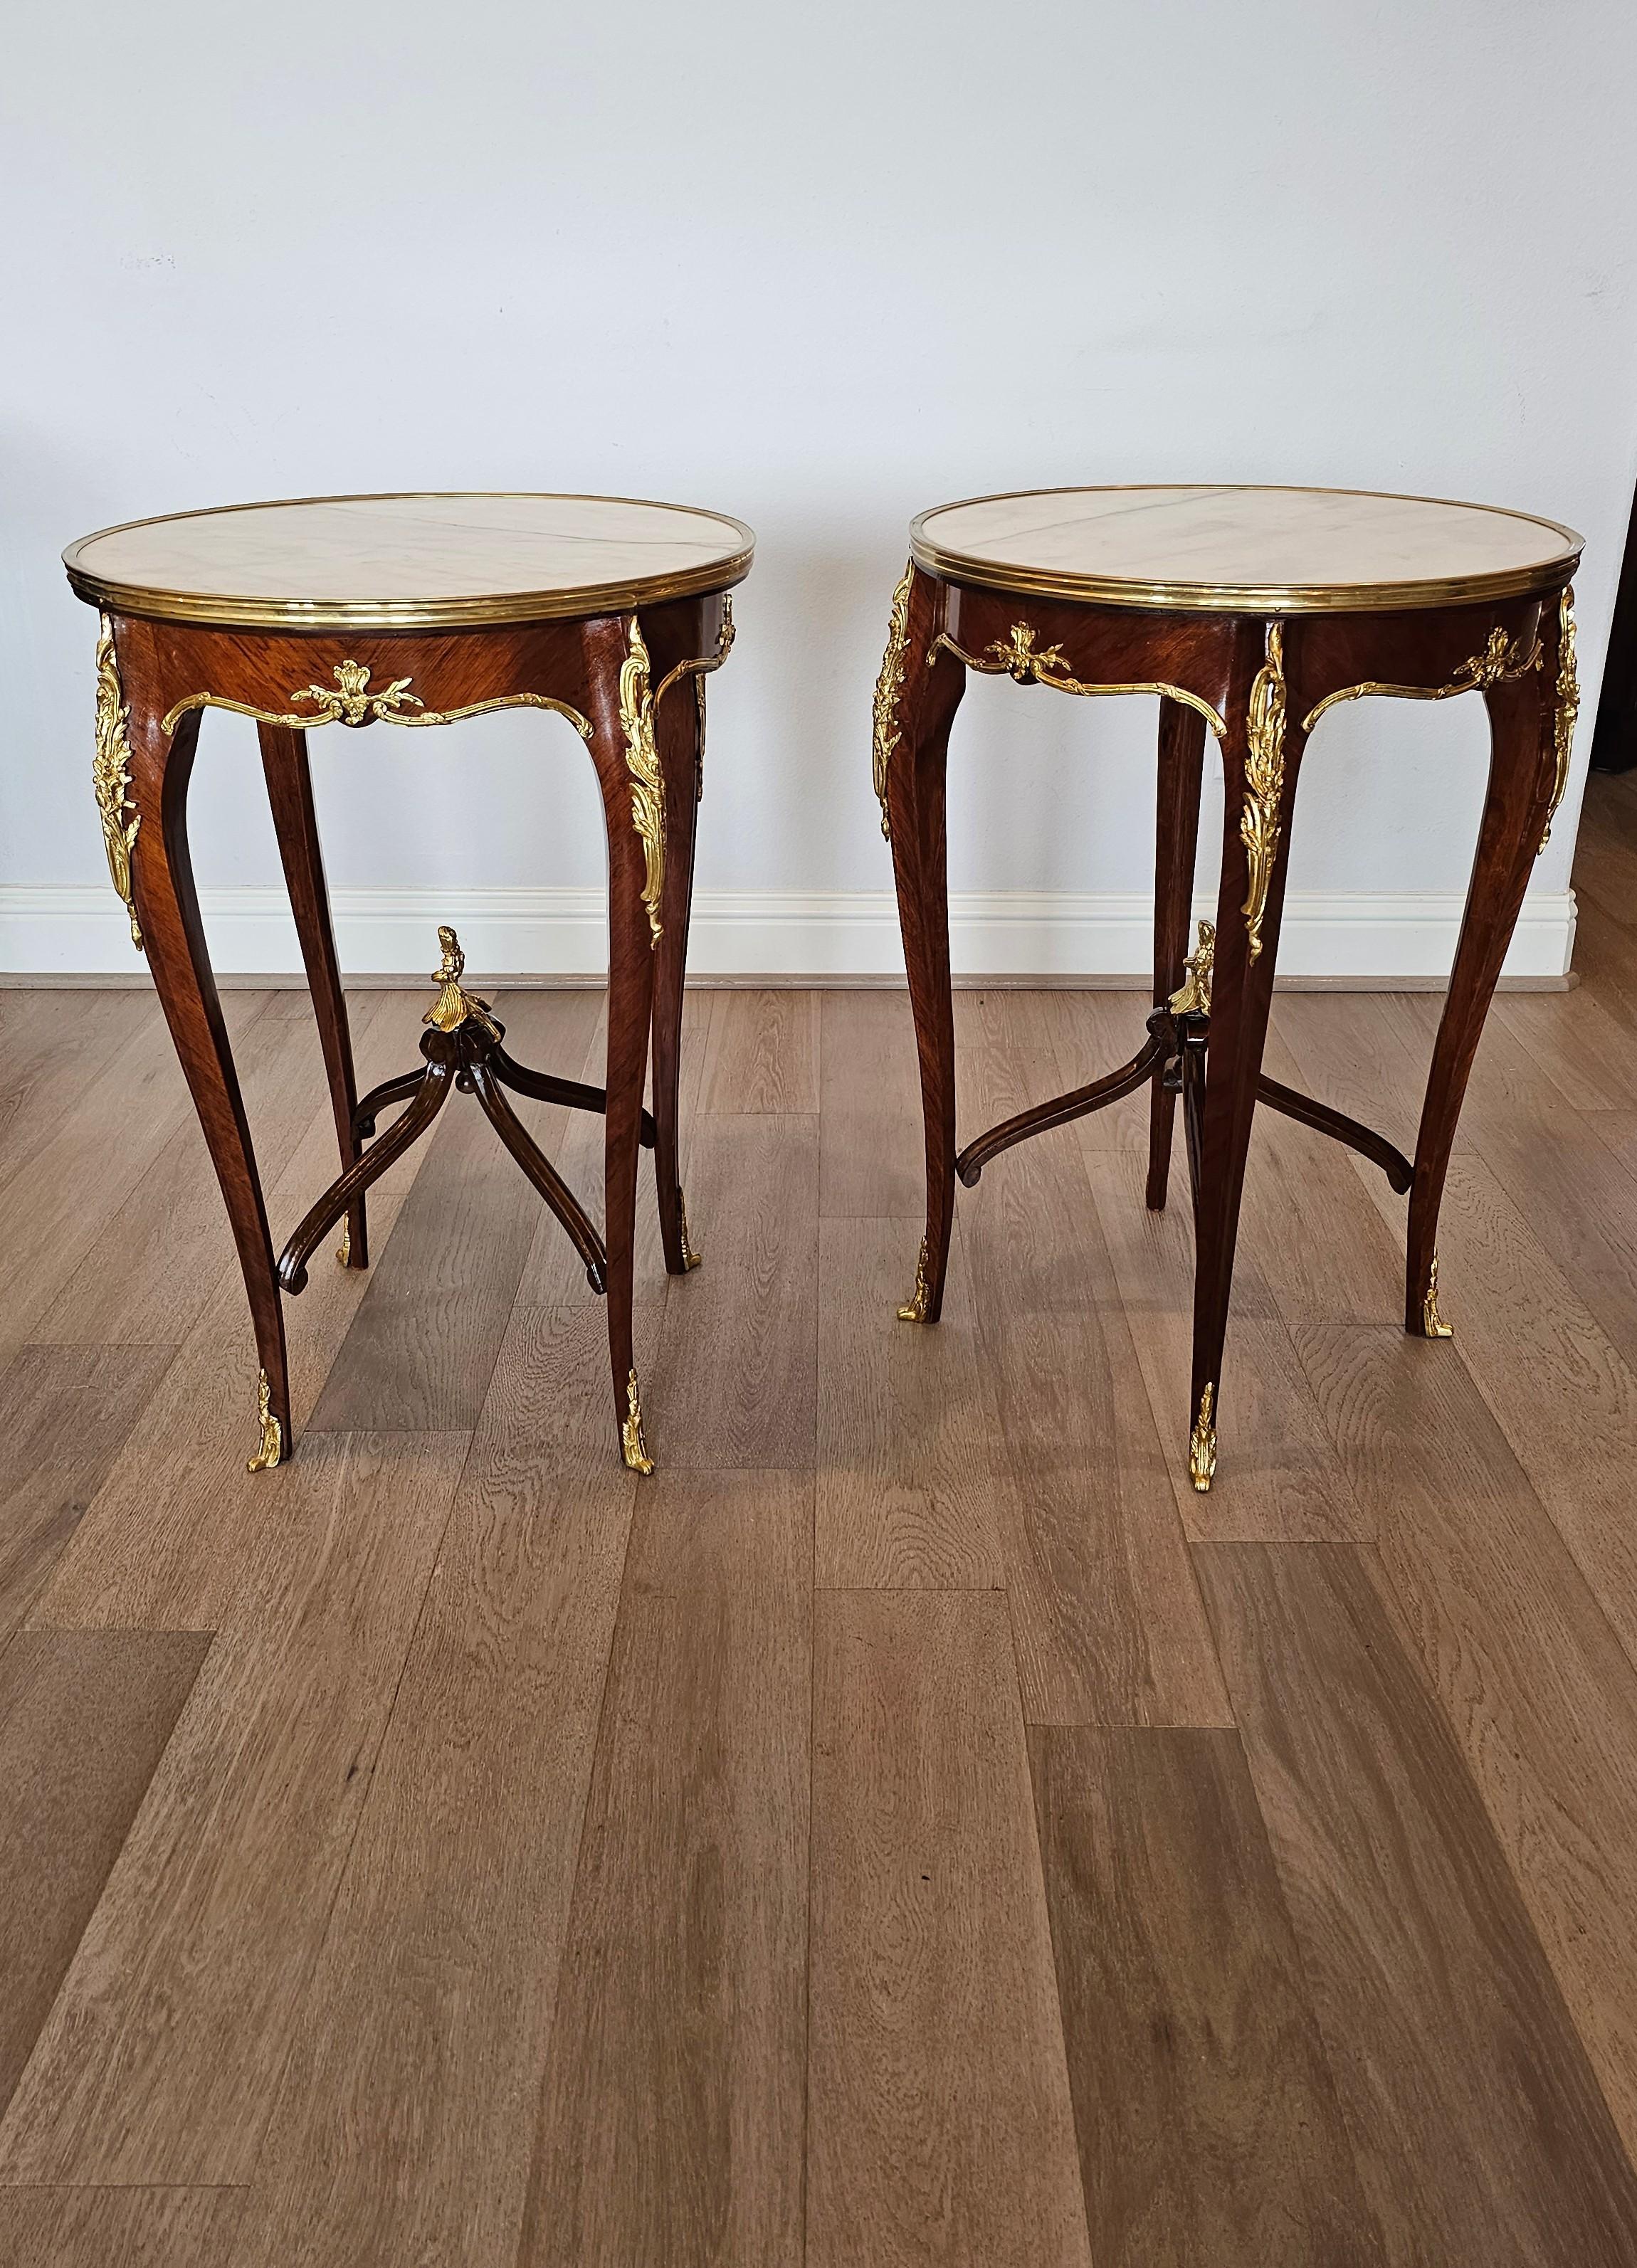 Pair of French Louis XV Style Gilt Bronze Mounted Kingwood Side Tables For Sale 2